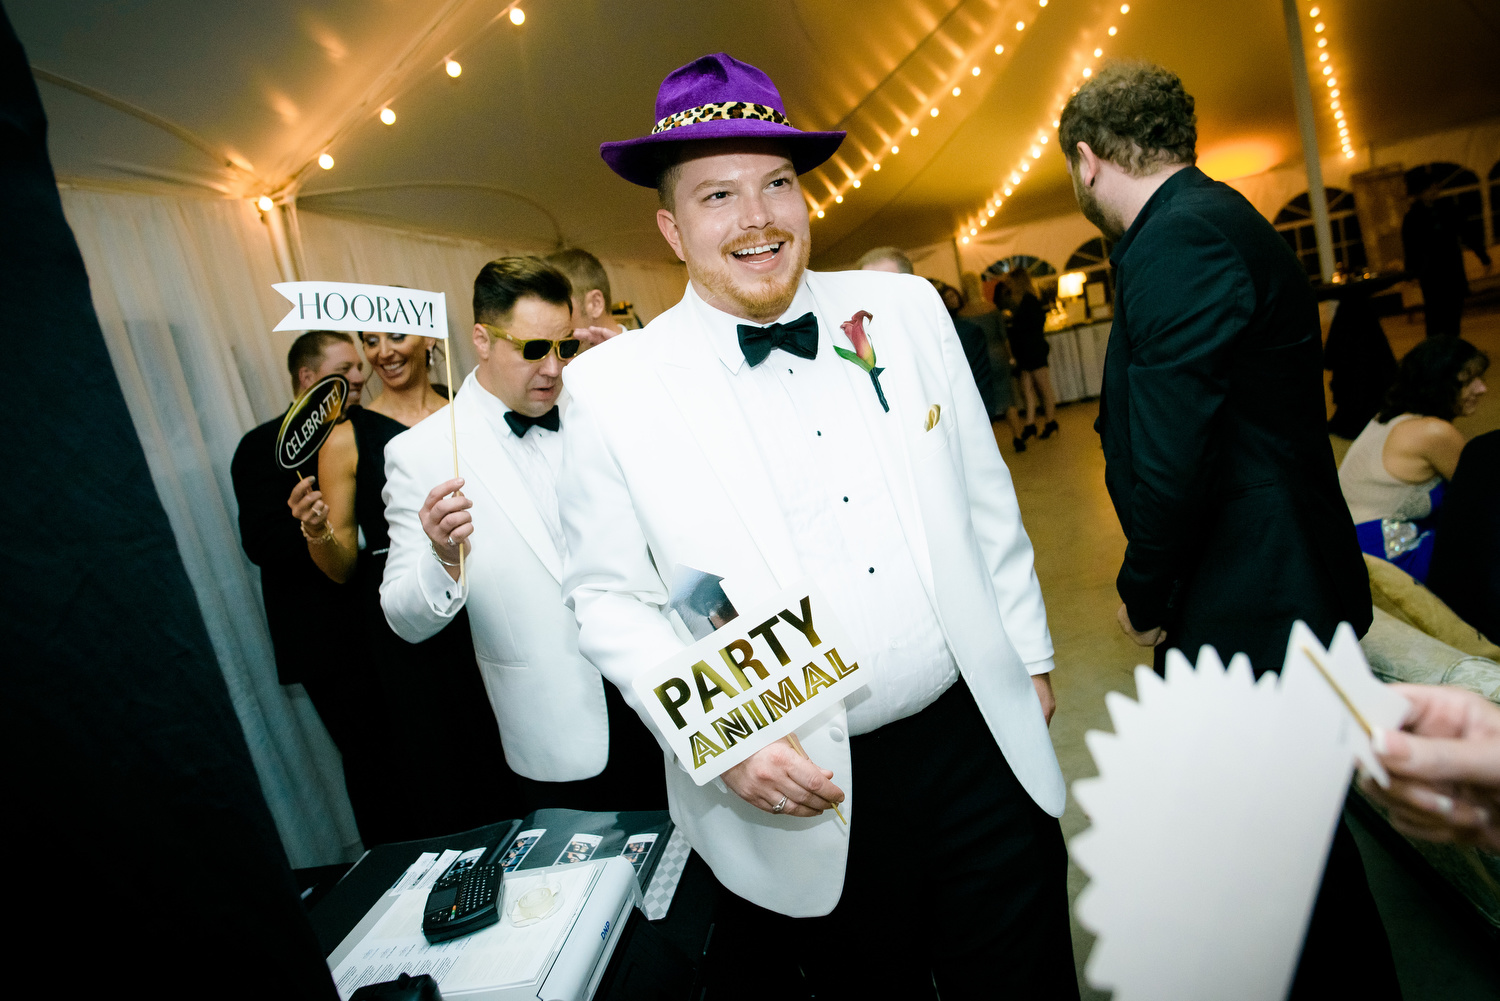 Funny reception moment during a wedding at at Heritage Prairie Farm.